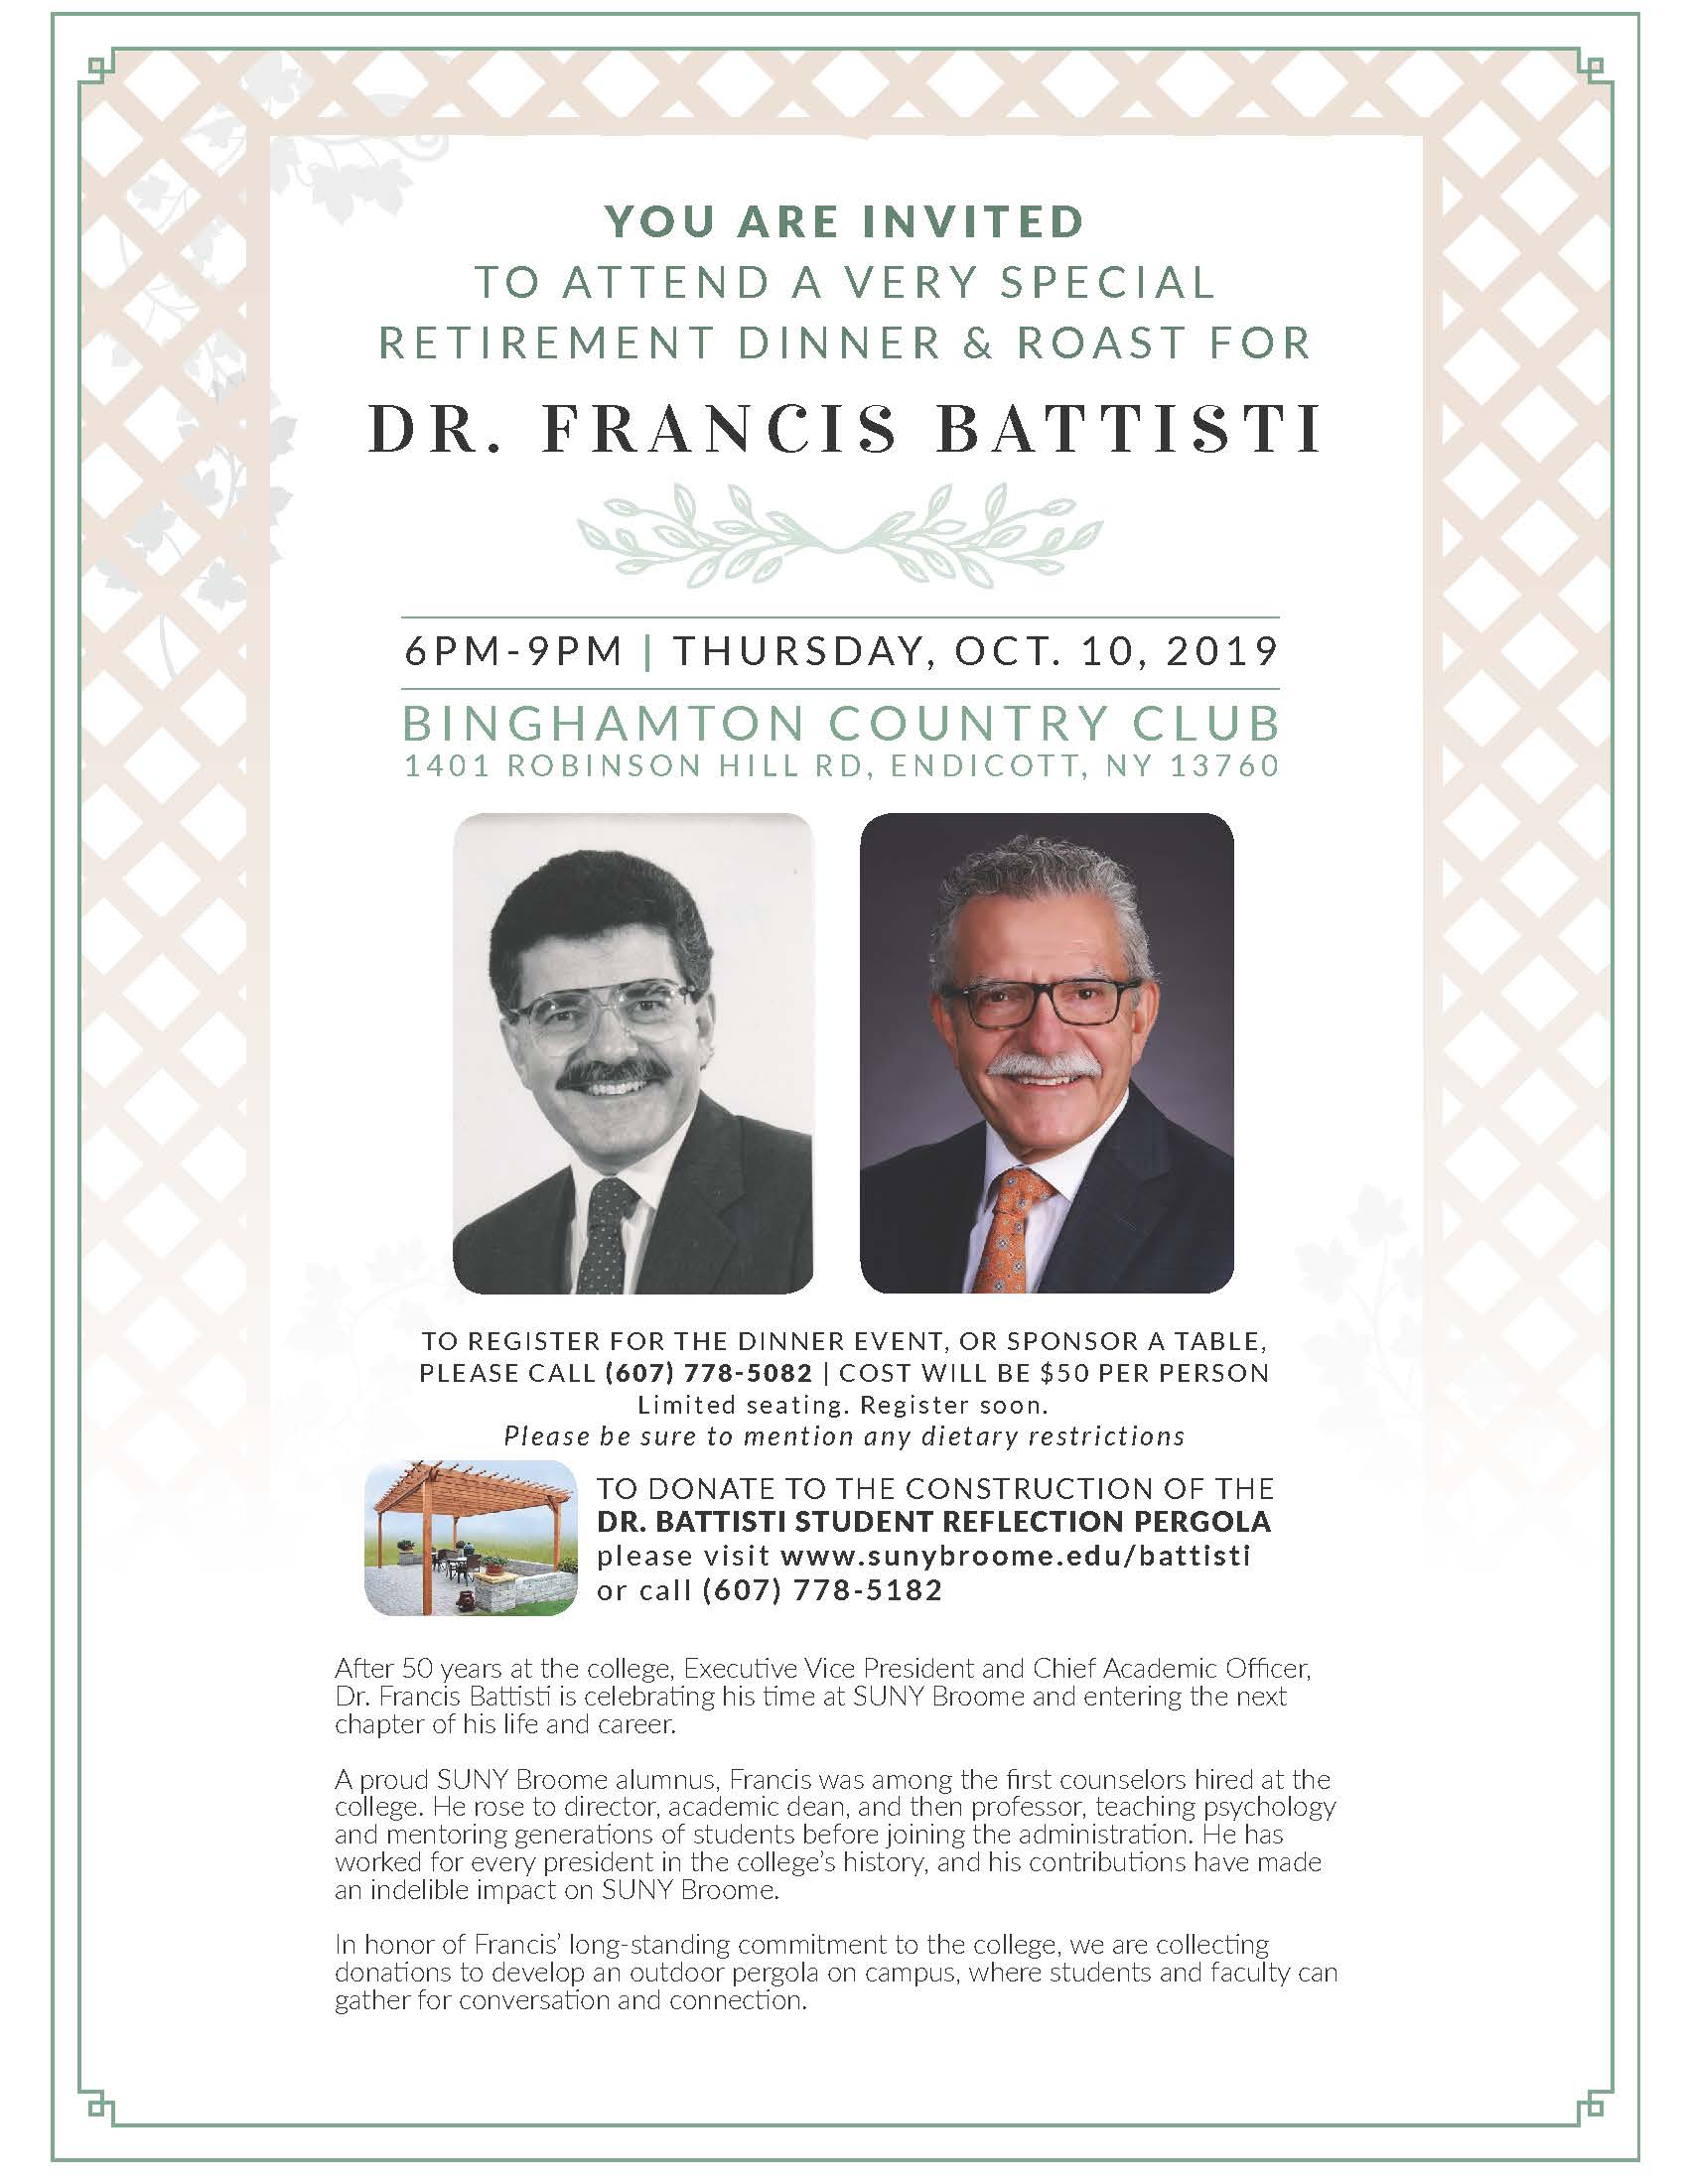 You are invited to attend a very special retirement dinner and roast for Dr. Francis Battisti from 6 to 9 p.m. Thursday, Oct. 10, at the Binghamton Country Club, located at 1401 Robinson Hill Road in Endicott.